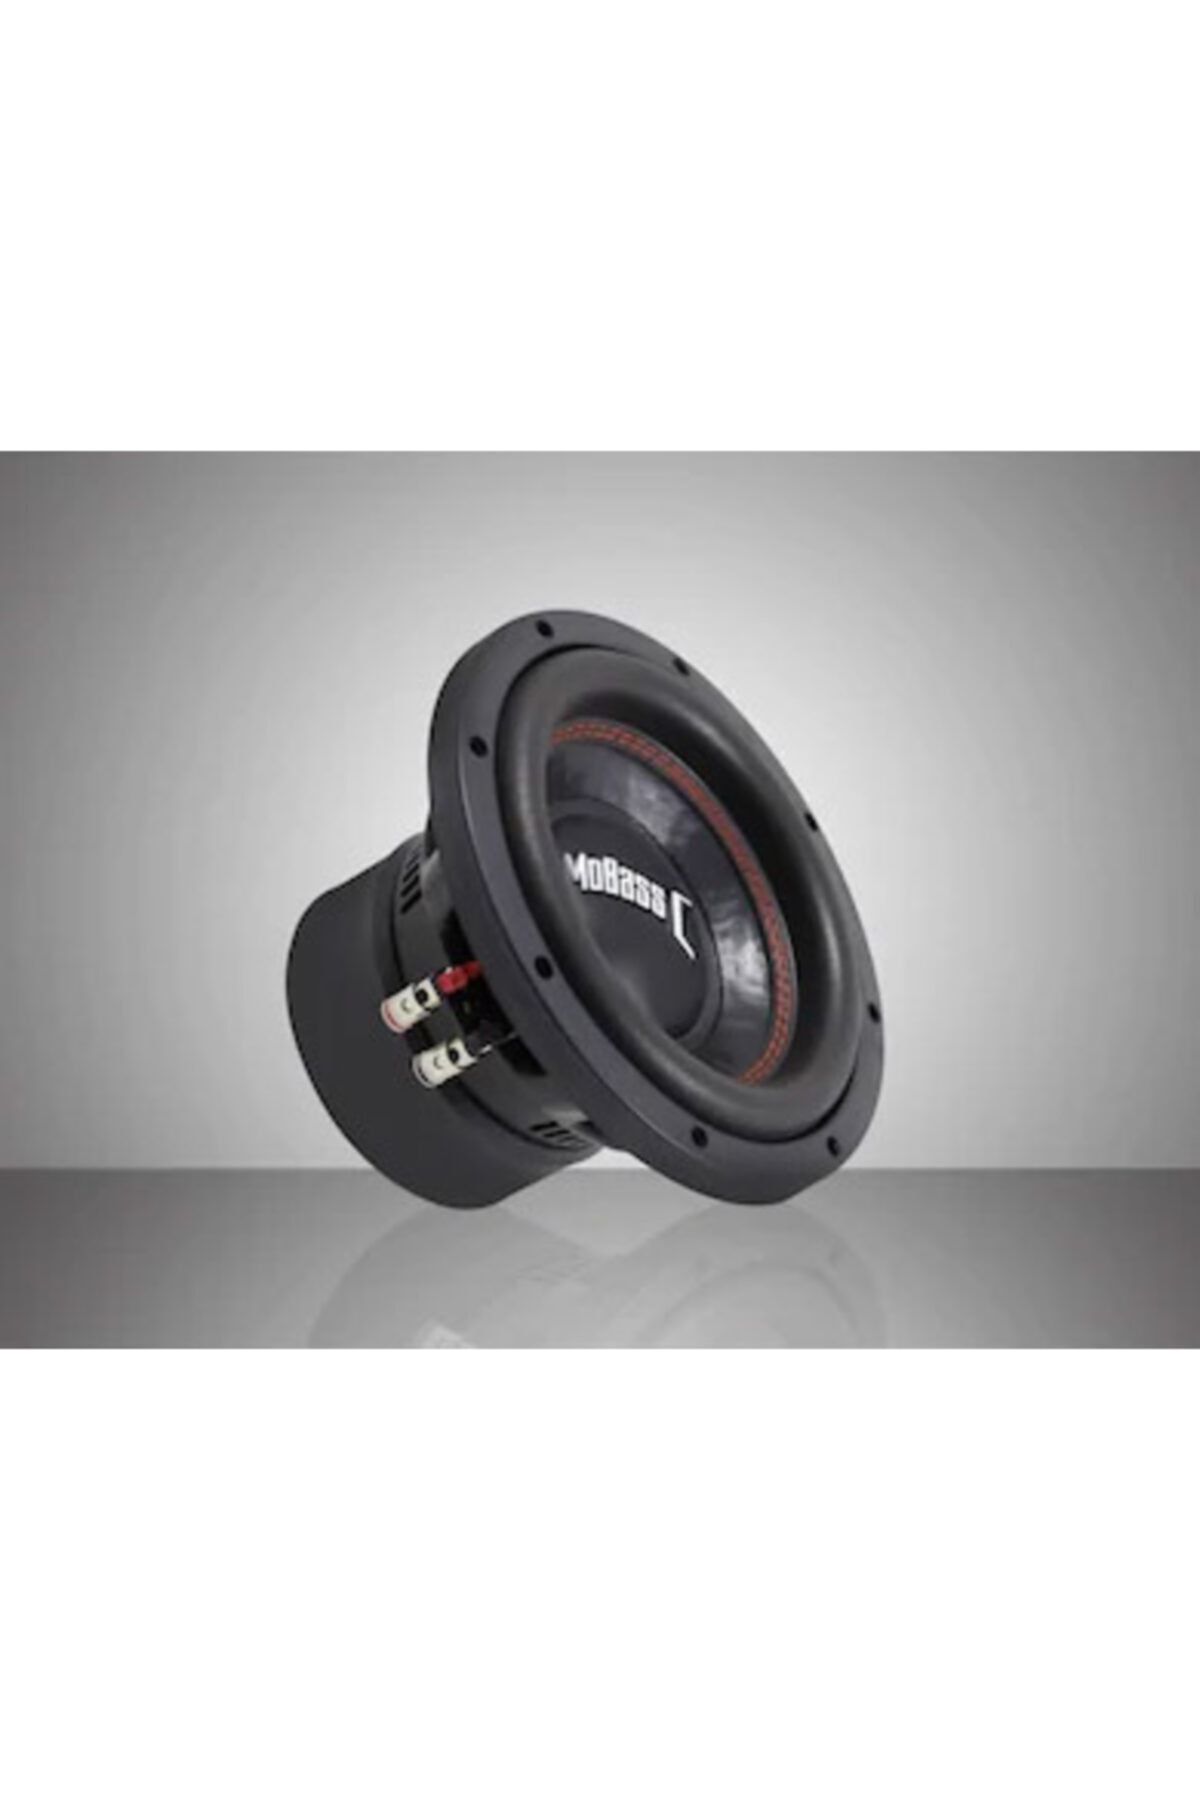 Mobass Mb-208s 20 Cm Subwoofer